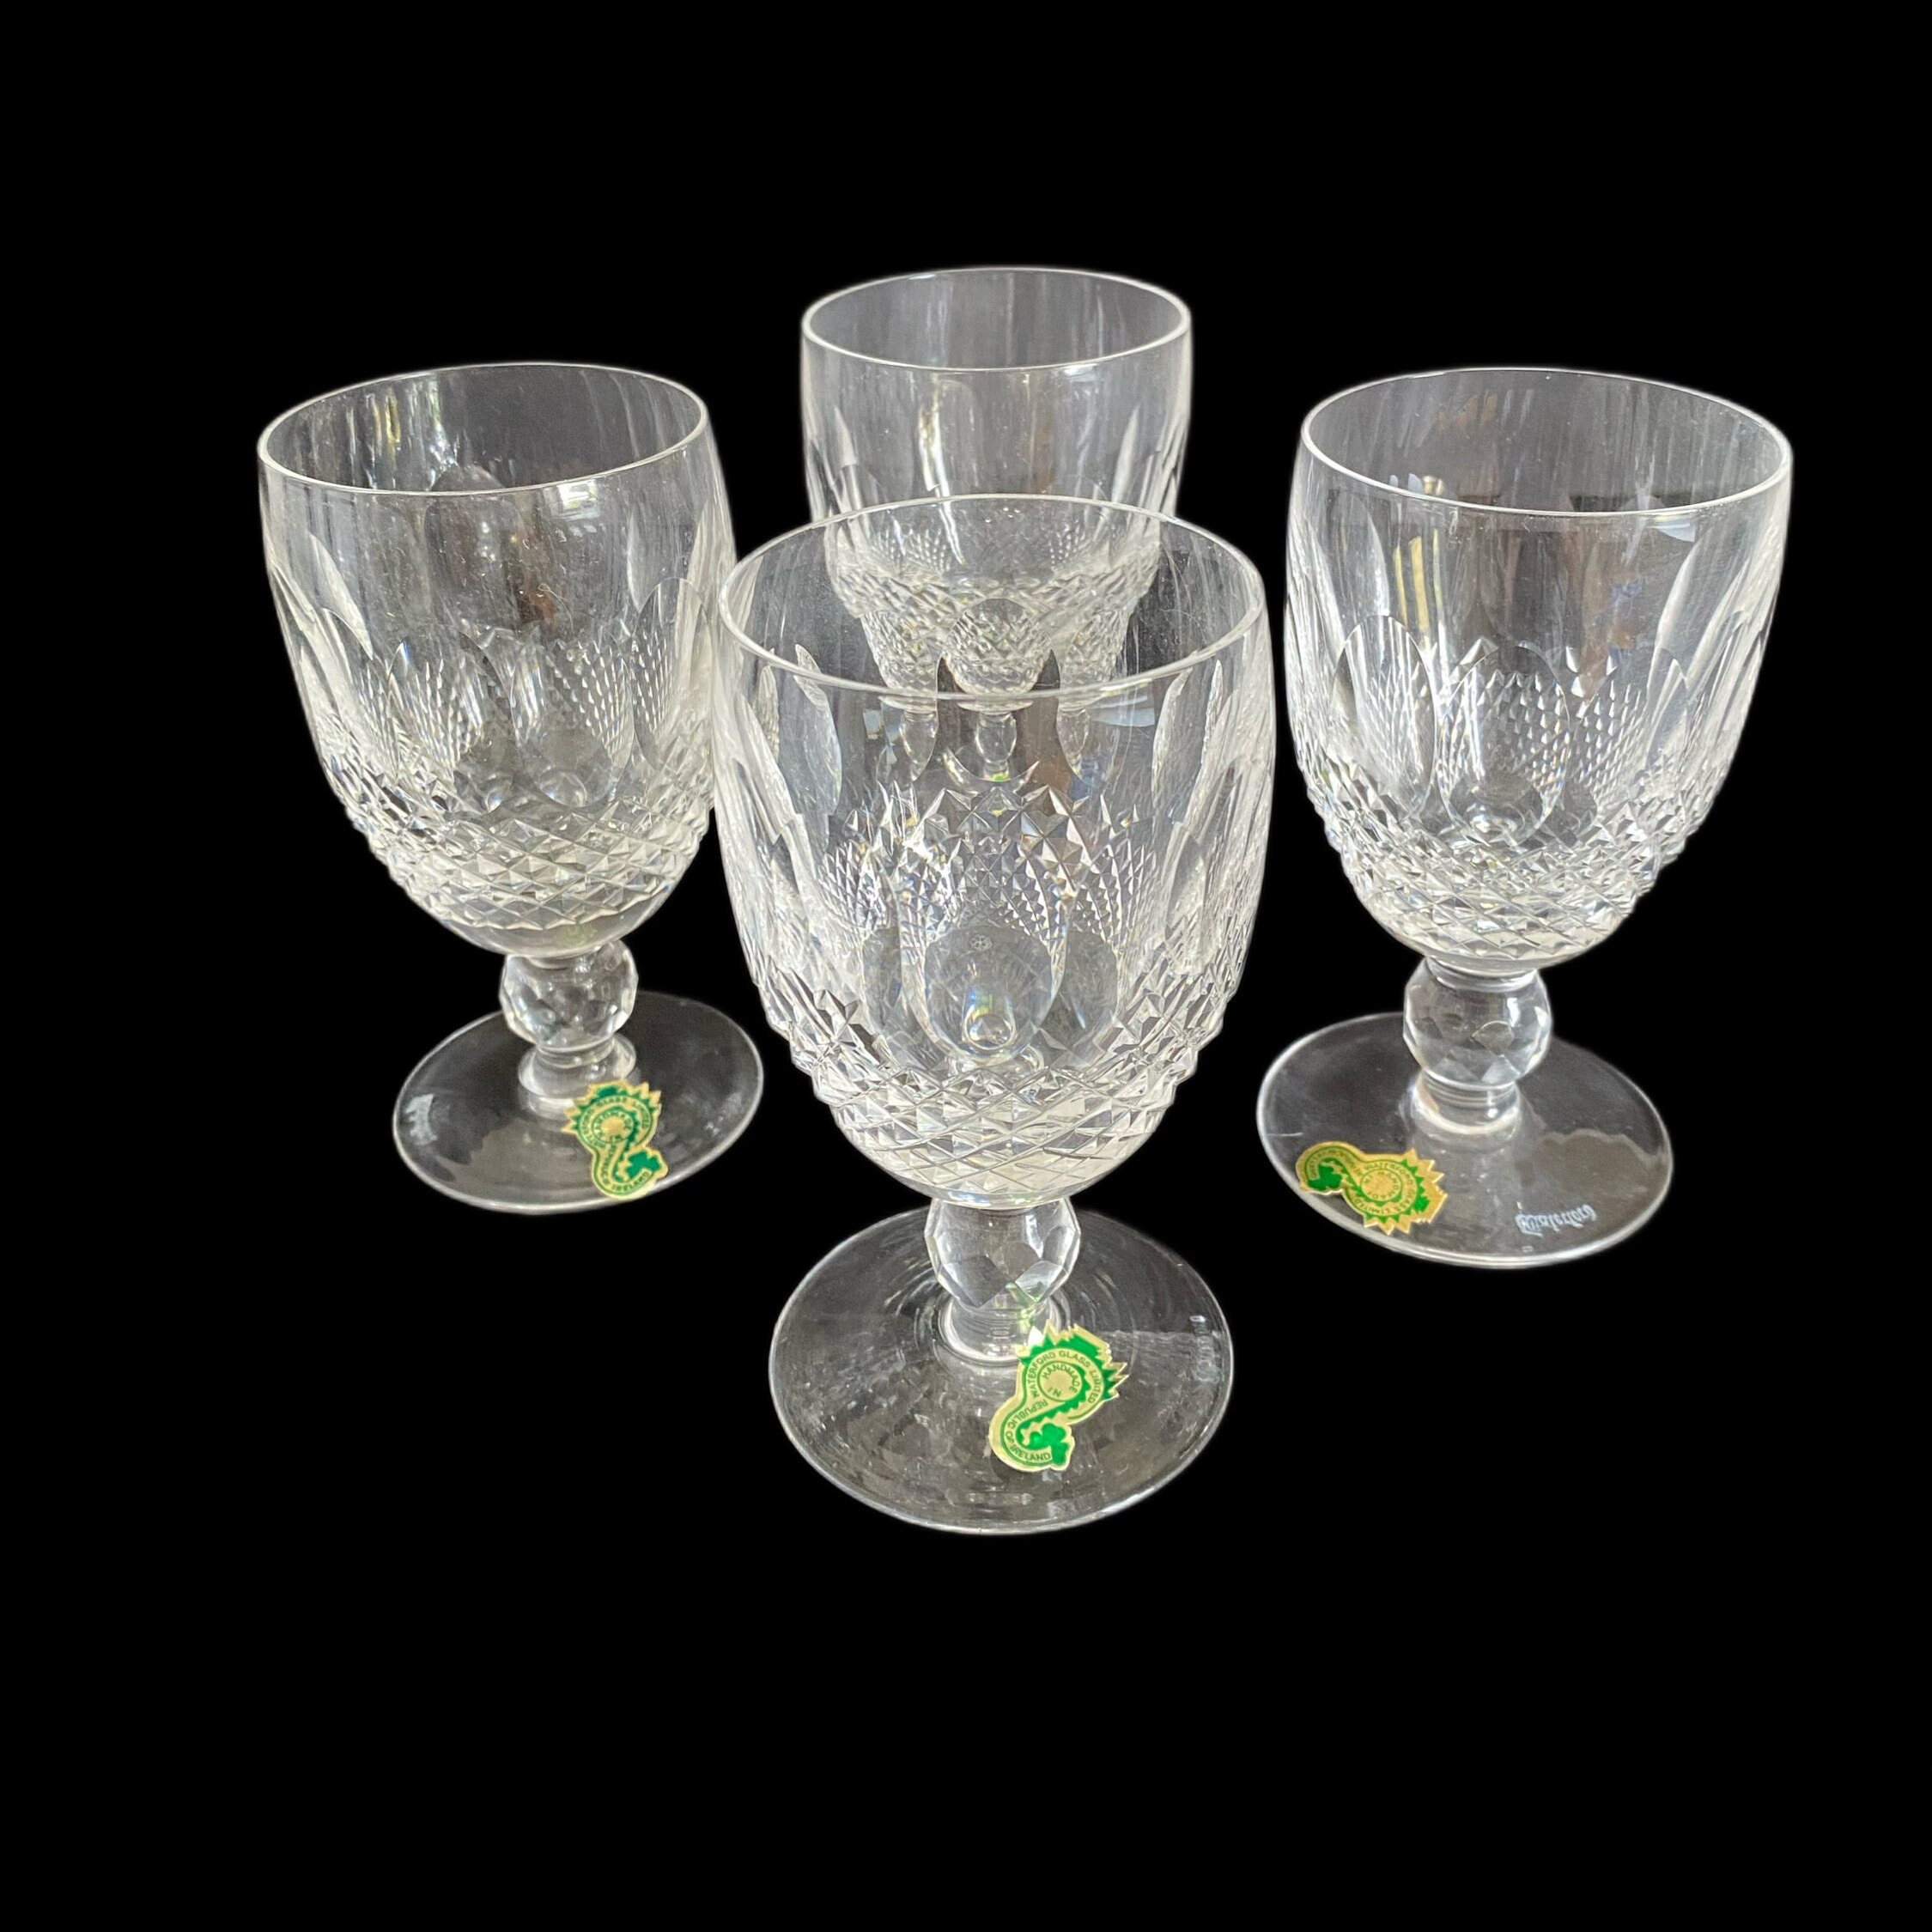 3 Waterford Colleen Short Stem Crystal 4 1/2 White Wine Glasses 4